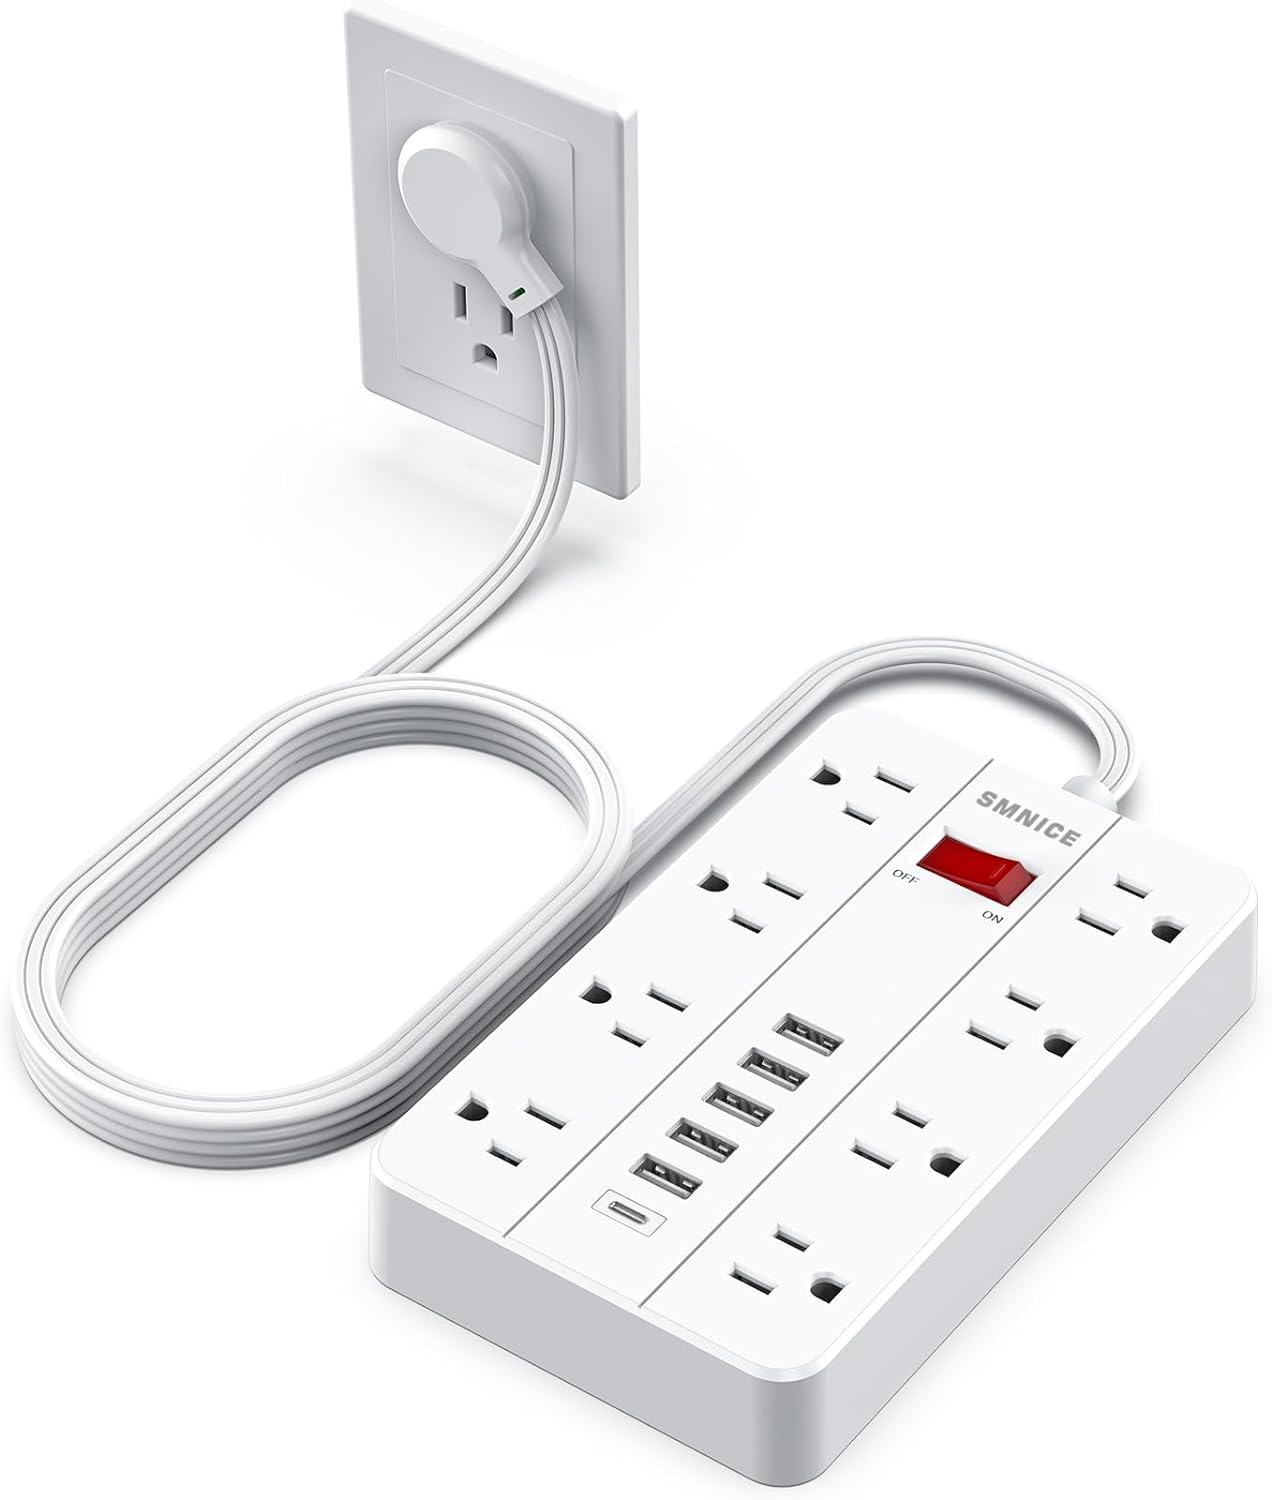 Power Strip with USB,Surge Protector Flat Plug with 8 Widely Spaced Outlets and 6 USB Ports(1 USB C), 5ft Extension Cord Wall Mountable Phone Tablet Laptop Computer Multiple Devices